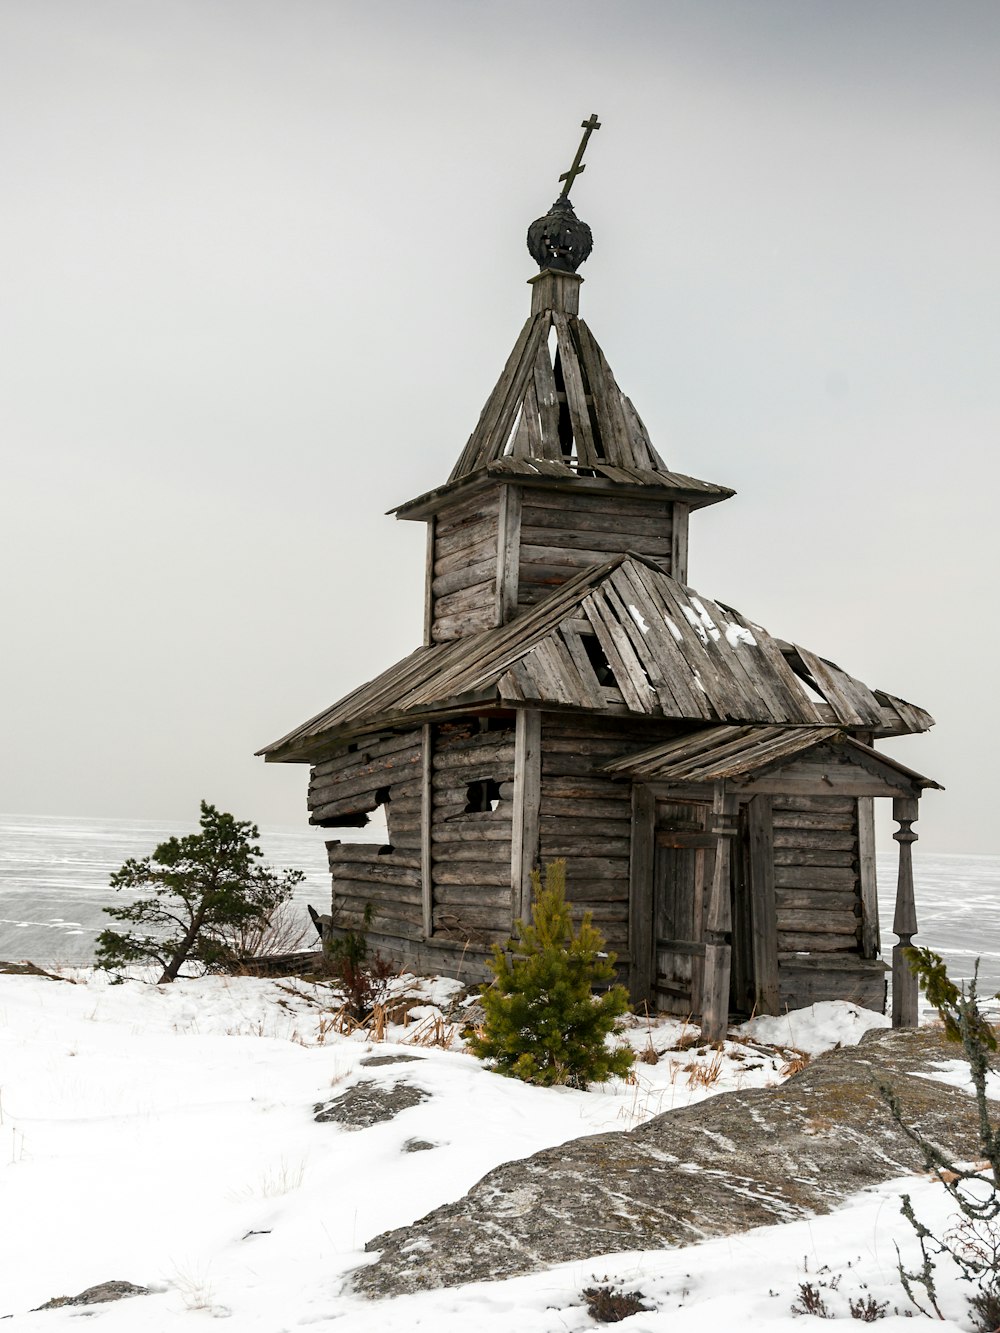 an old wooden church with a steeple in the snow